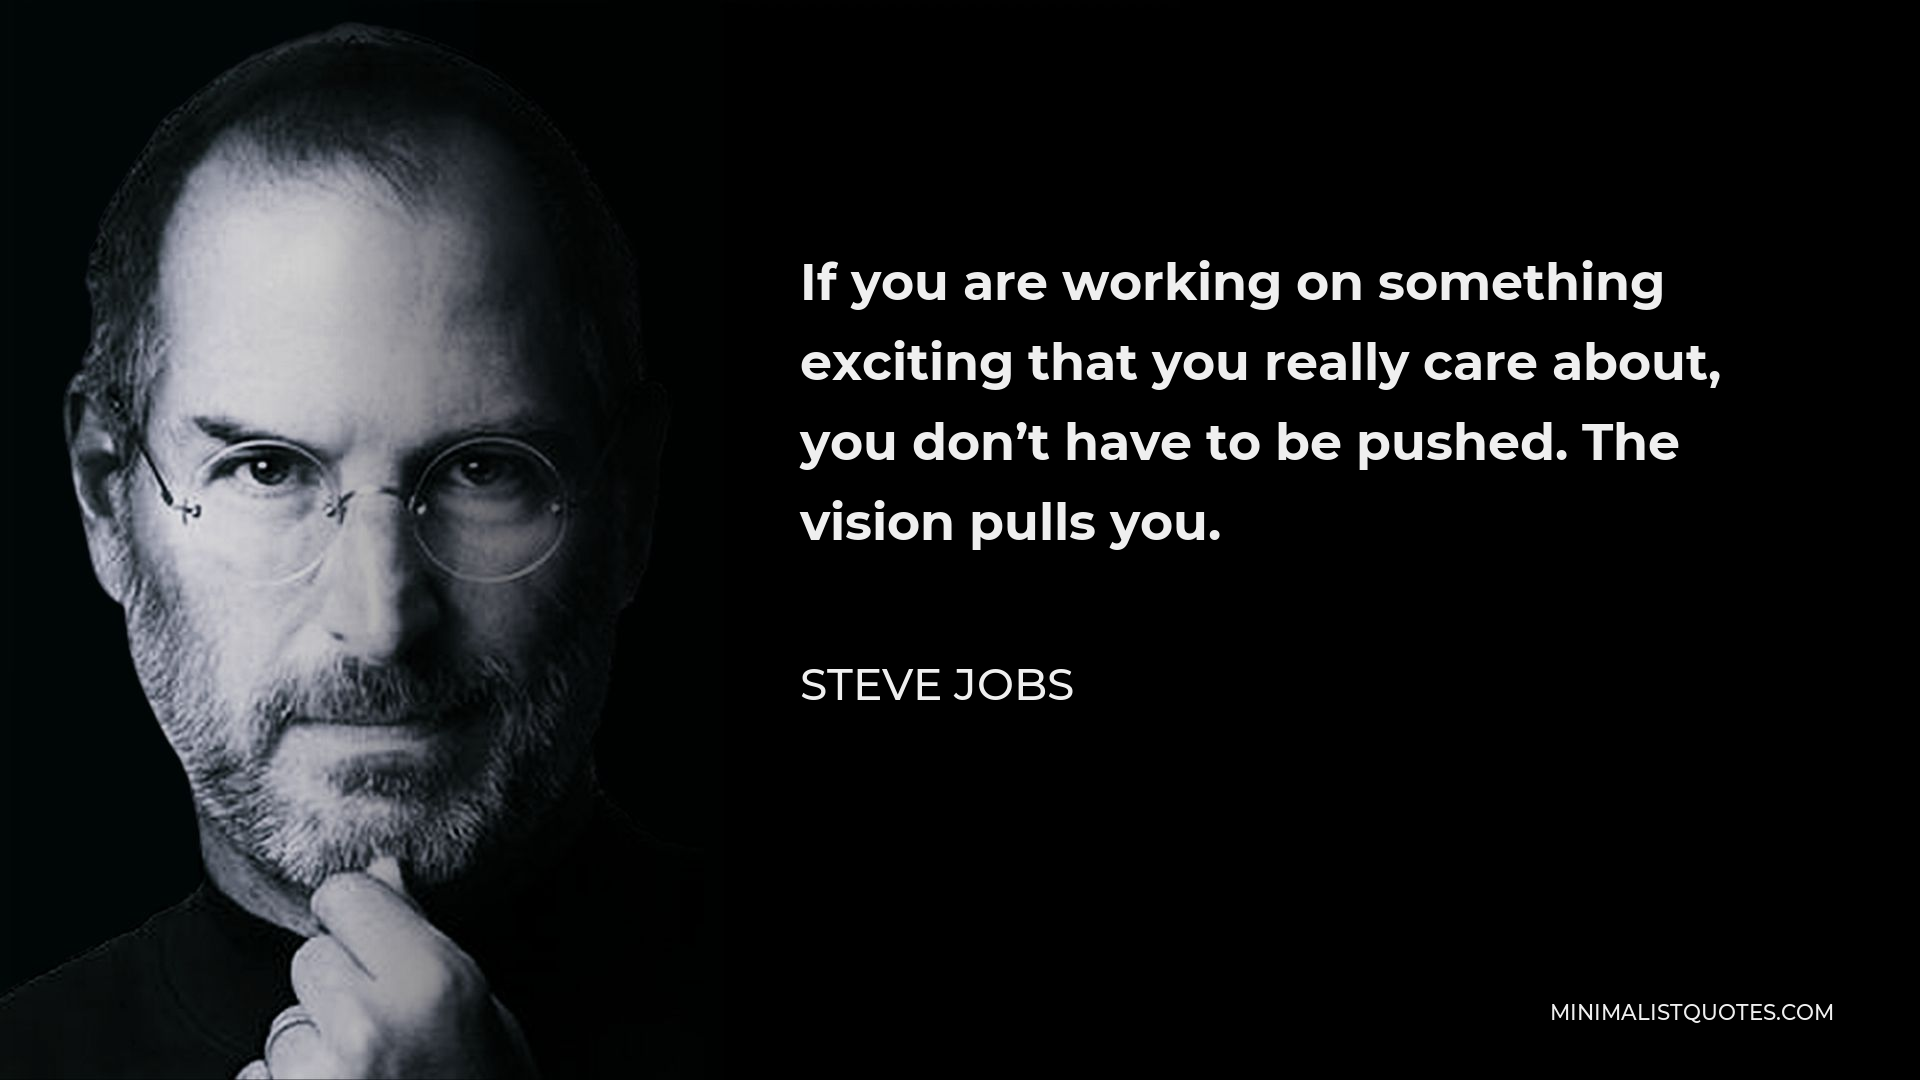 Steve Jobs Quote - If you are working on something exciting that you really care about, you don’t have to be pushed. The vision pulls you.